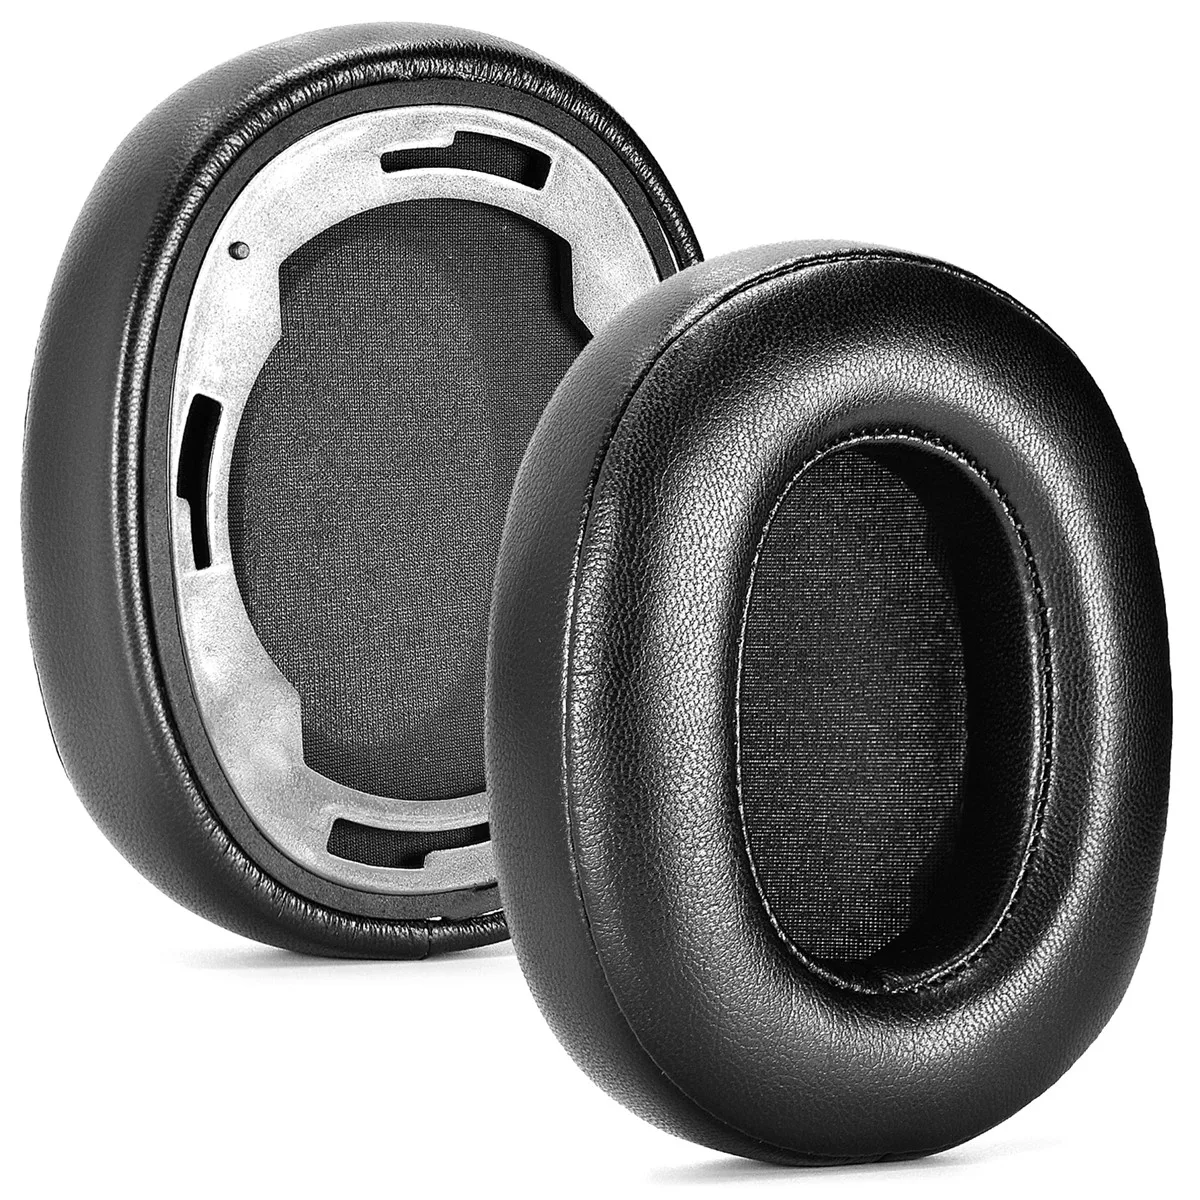 

Replacement Earpads For Turtle Beach Ear Force Elite 800 Headphones Accessories Soft Foam Ear Pad Cushion Covers Repair Parts